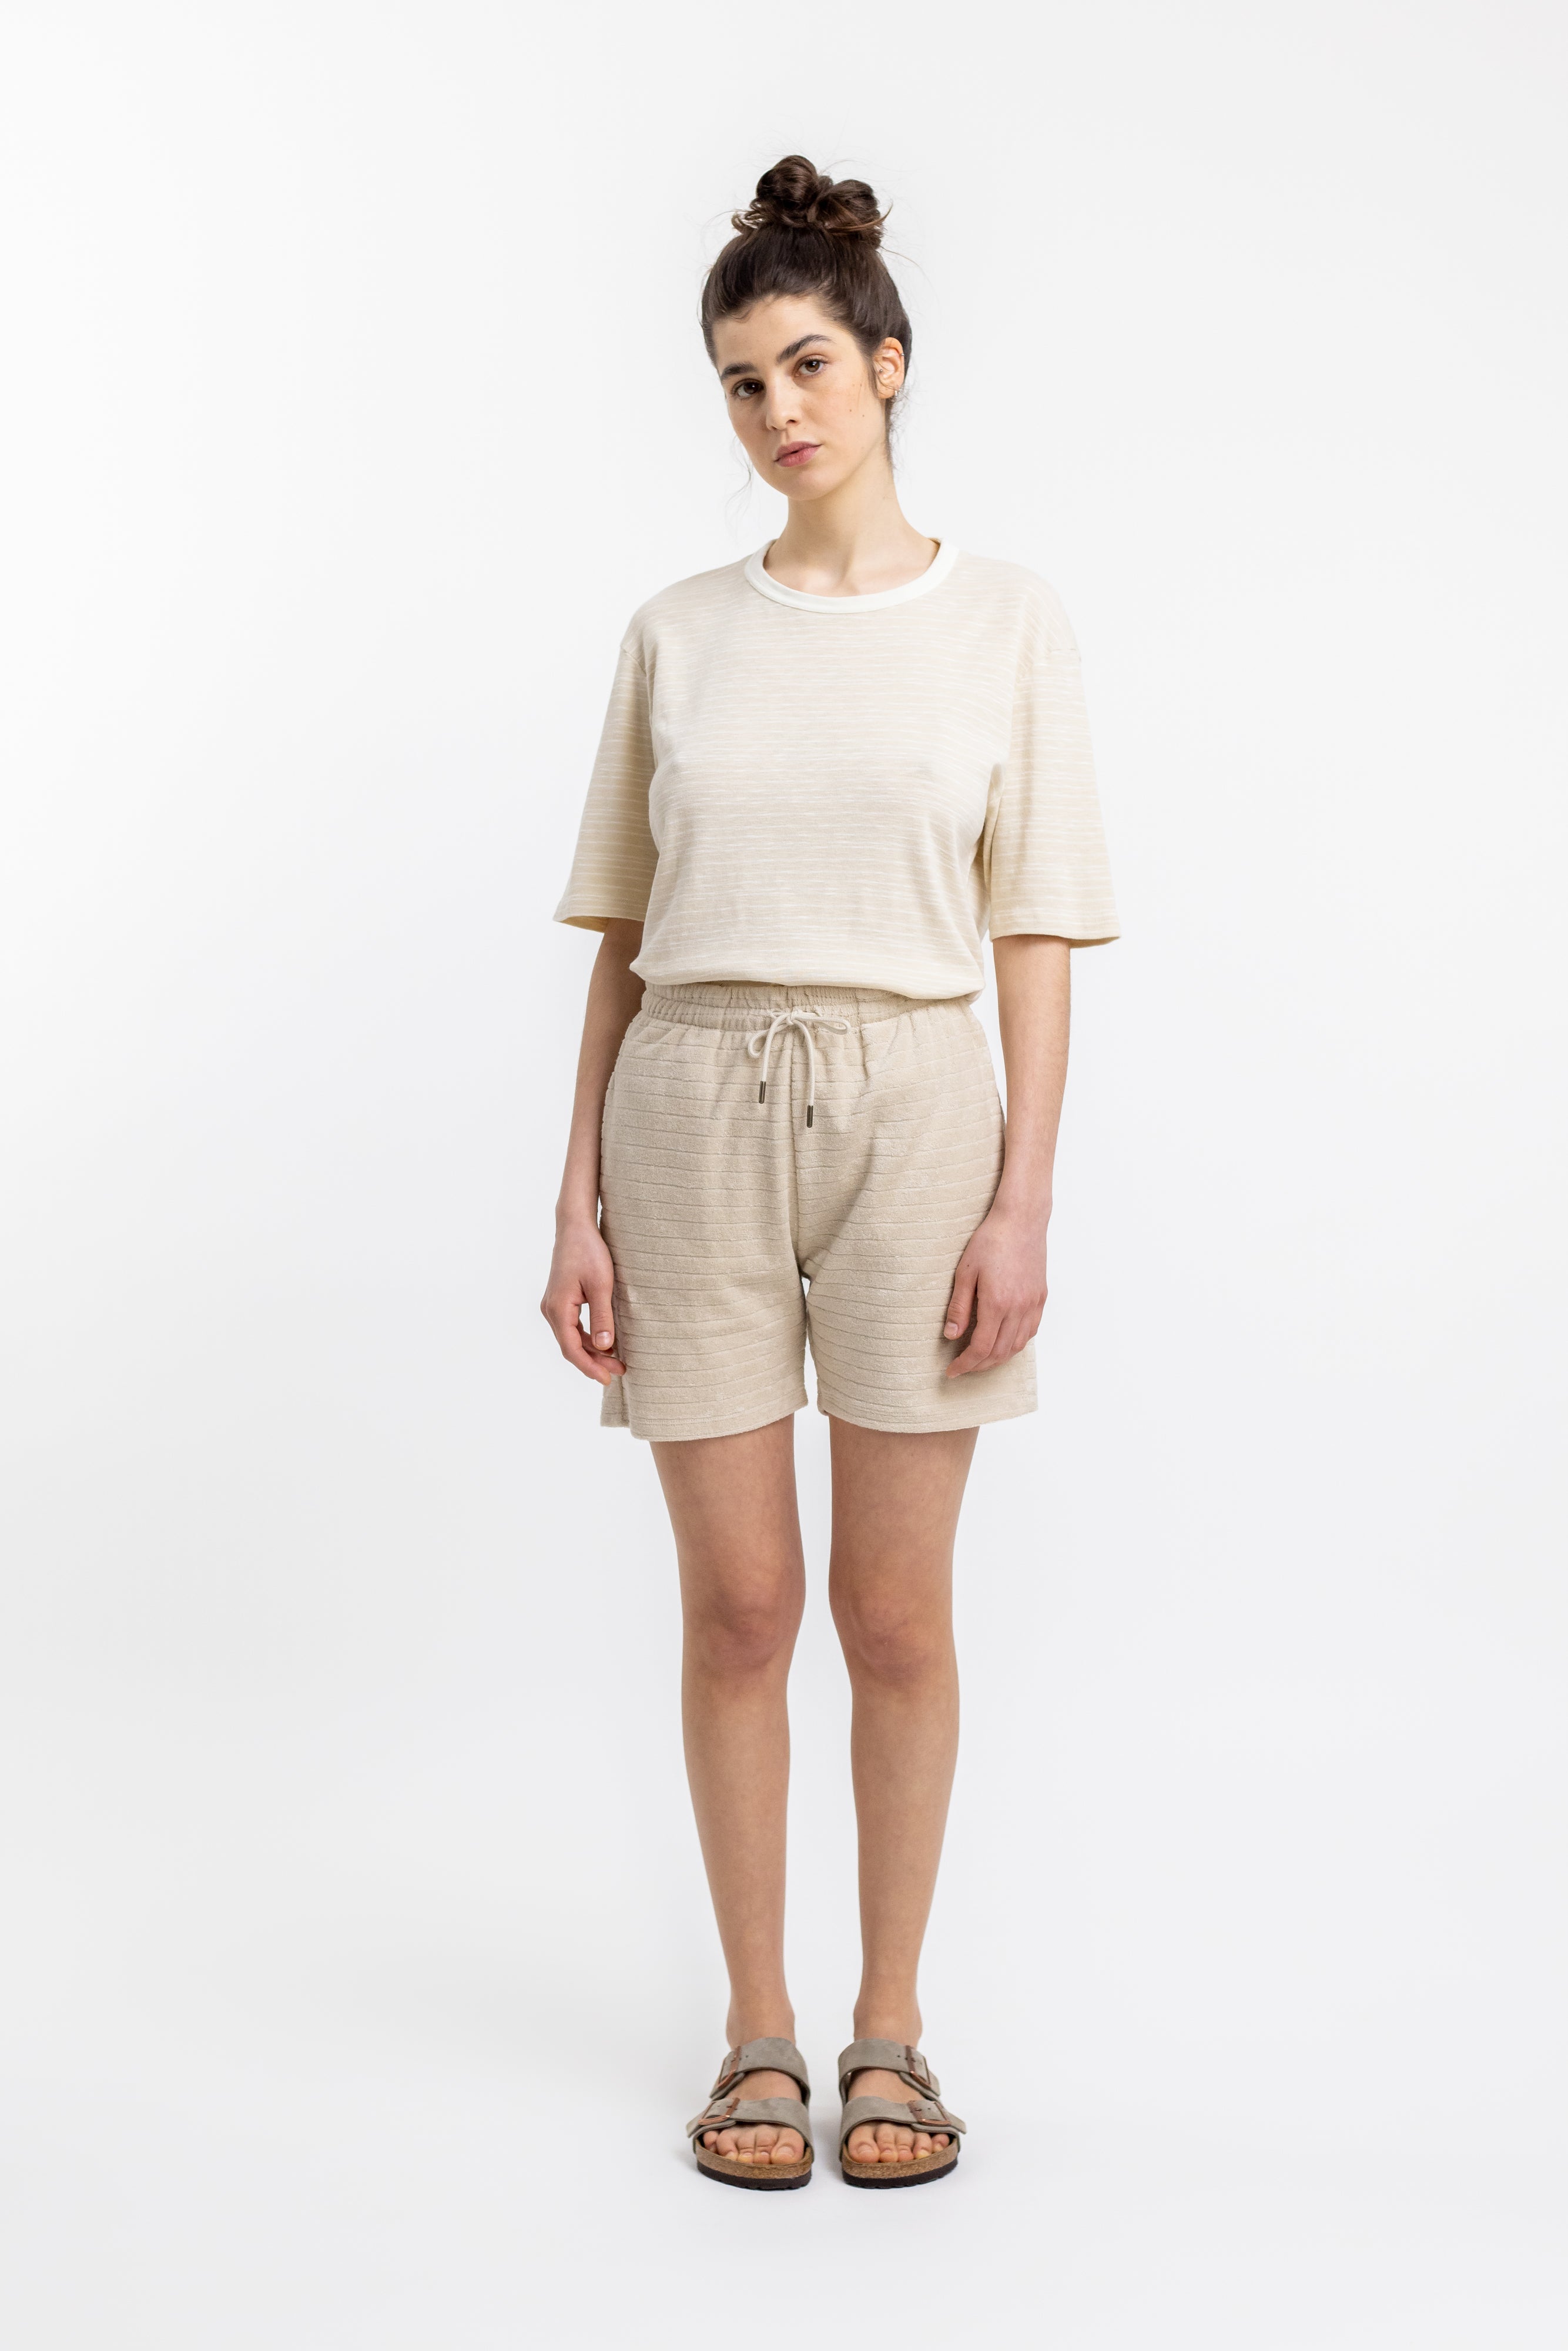 Beige sweatshorts made from 100% organic cotton from Rotholz